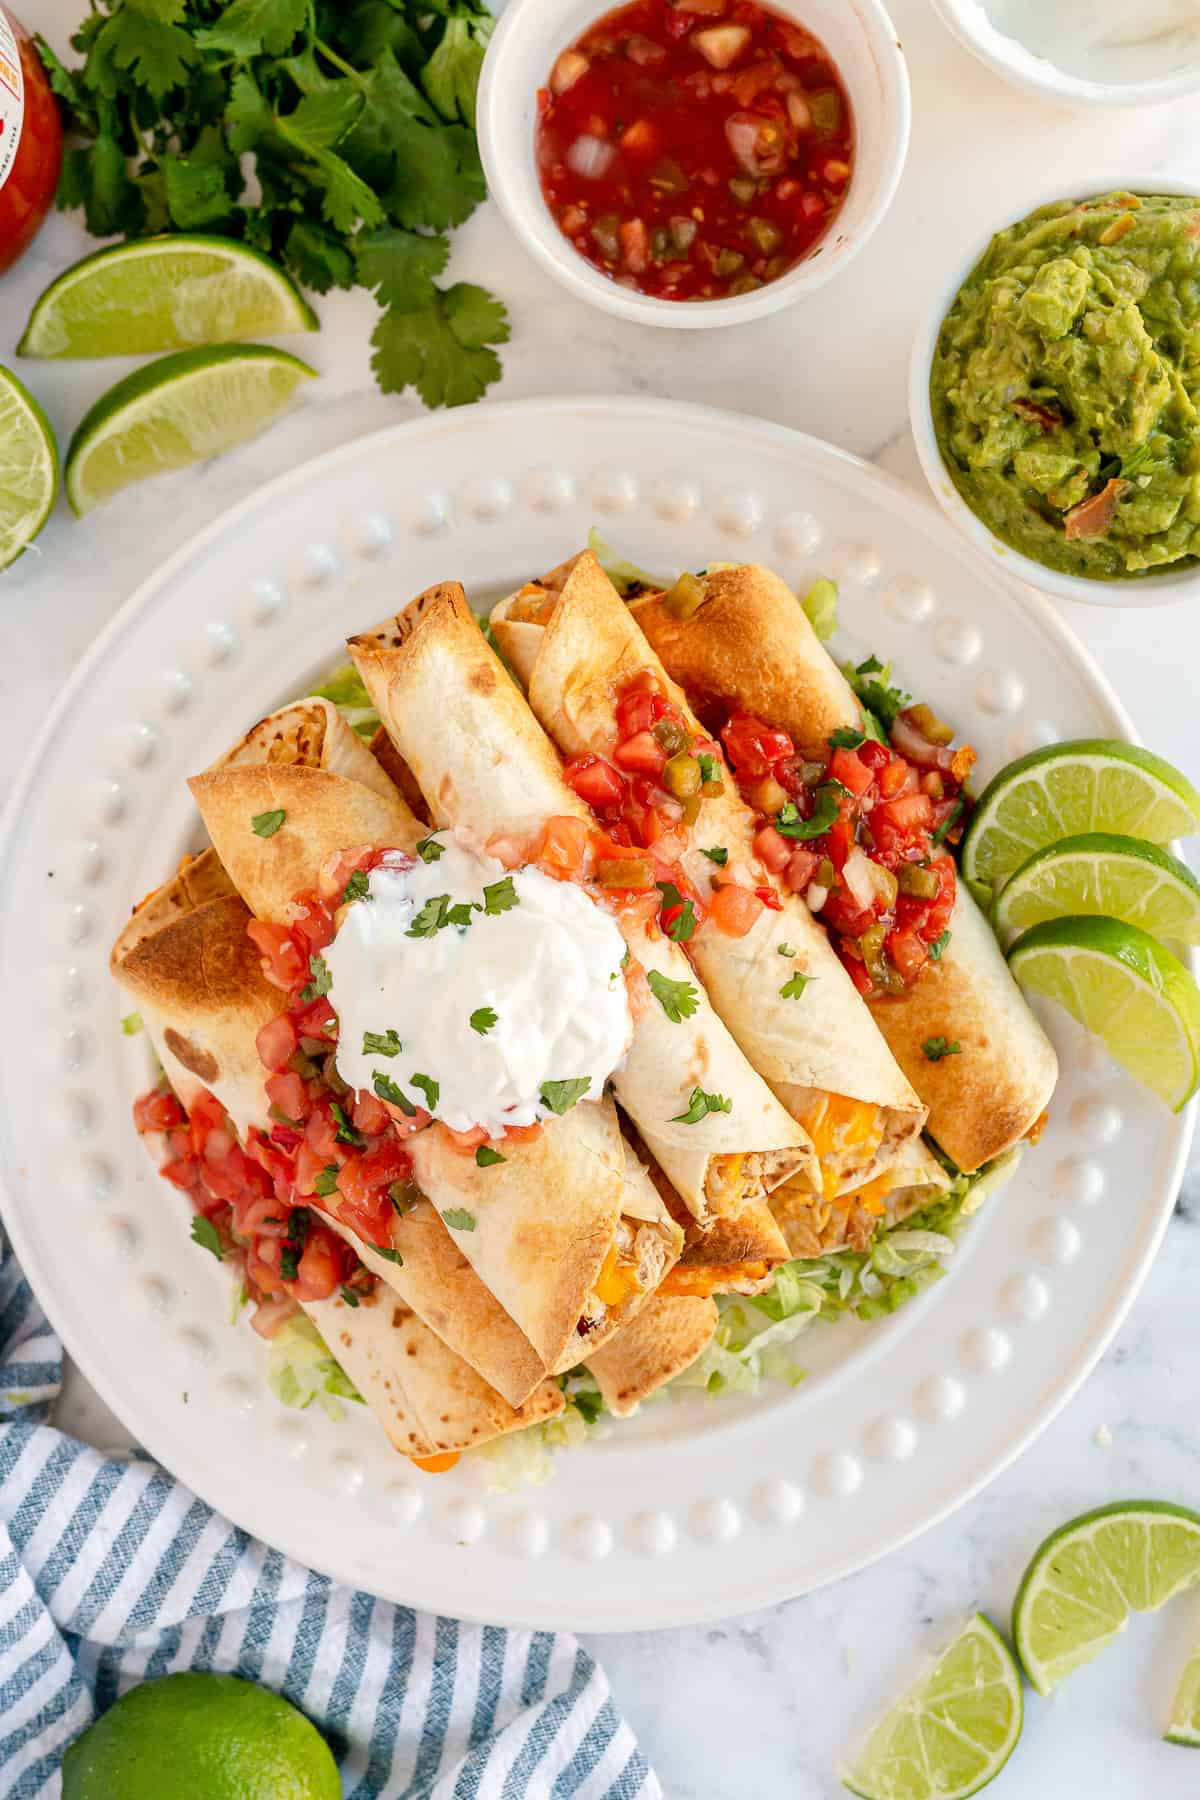 A pile of taquitos on a plate with salsa and sour cream.